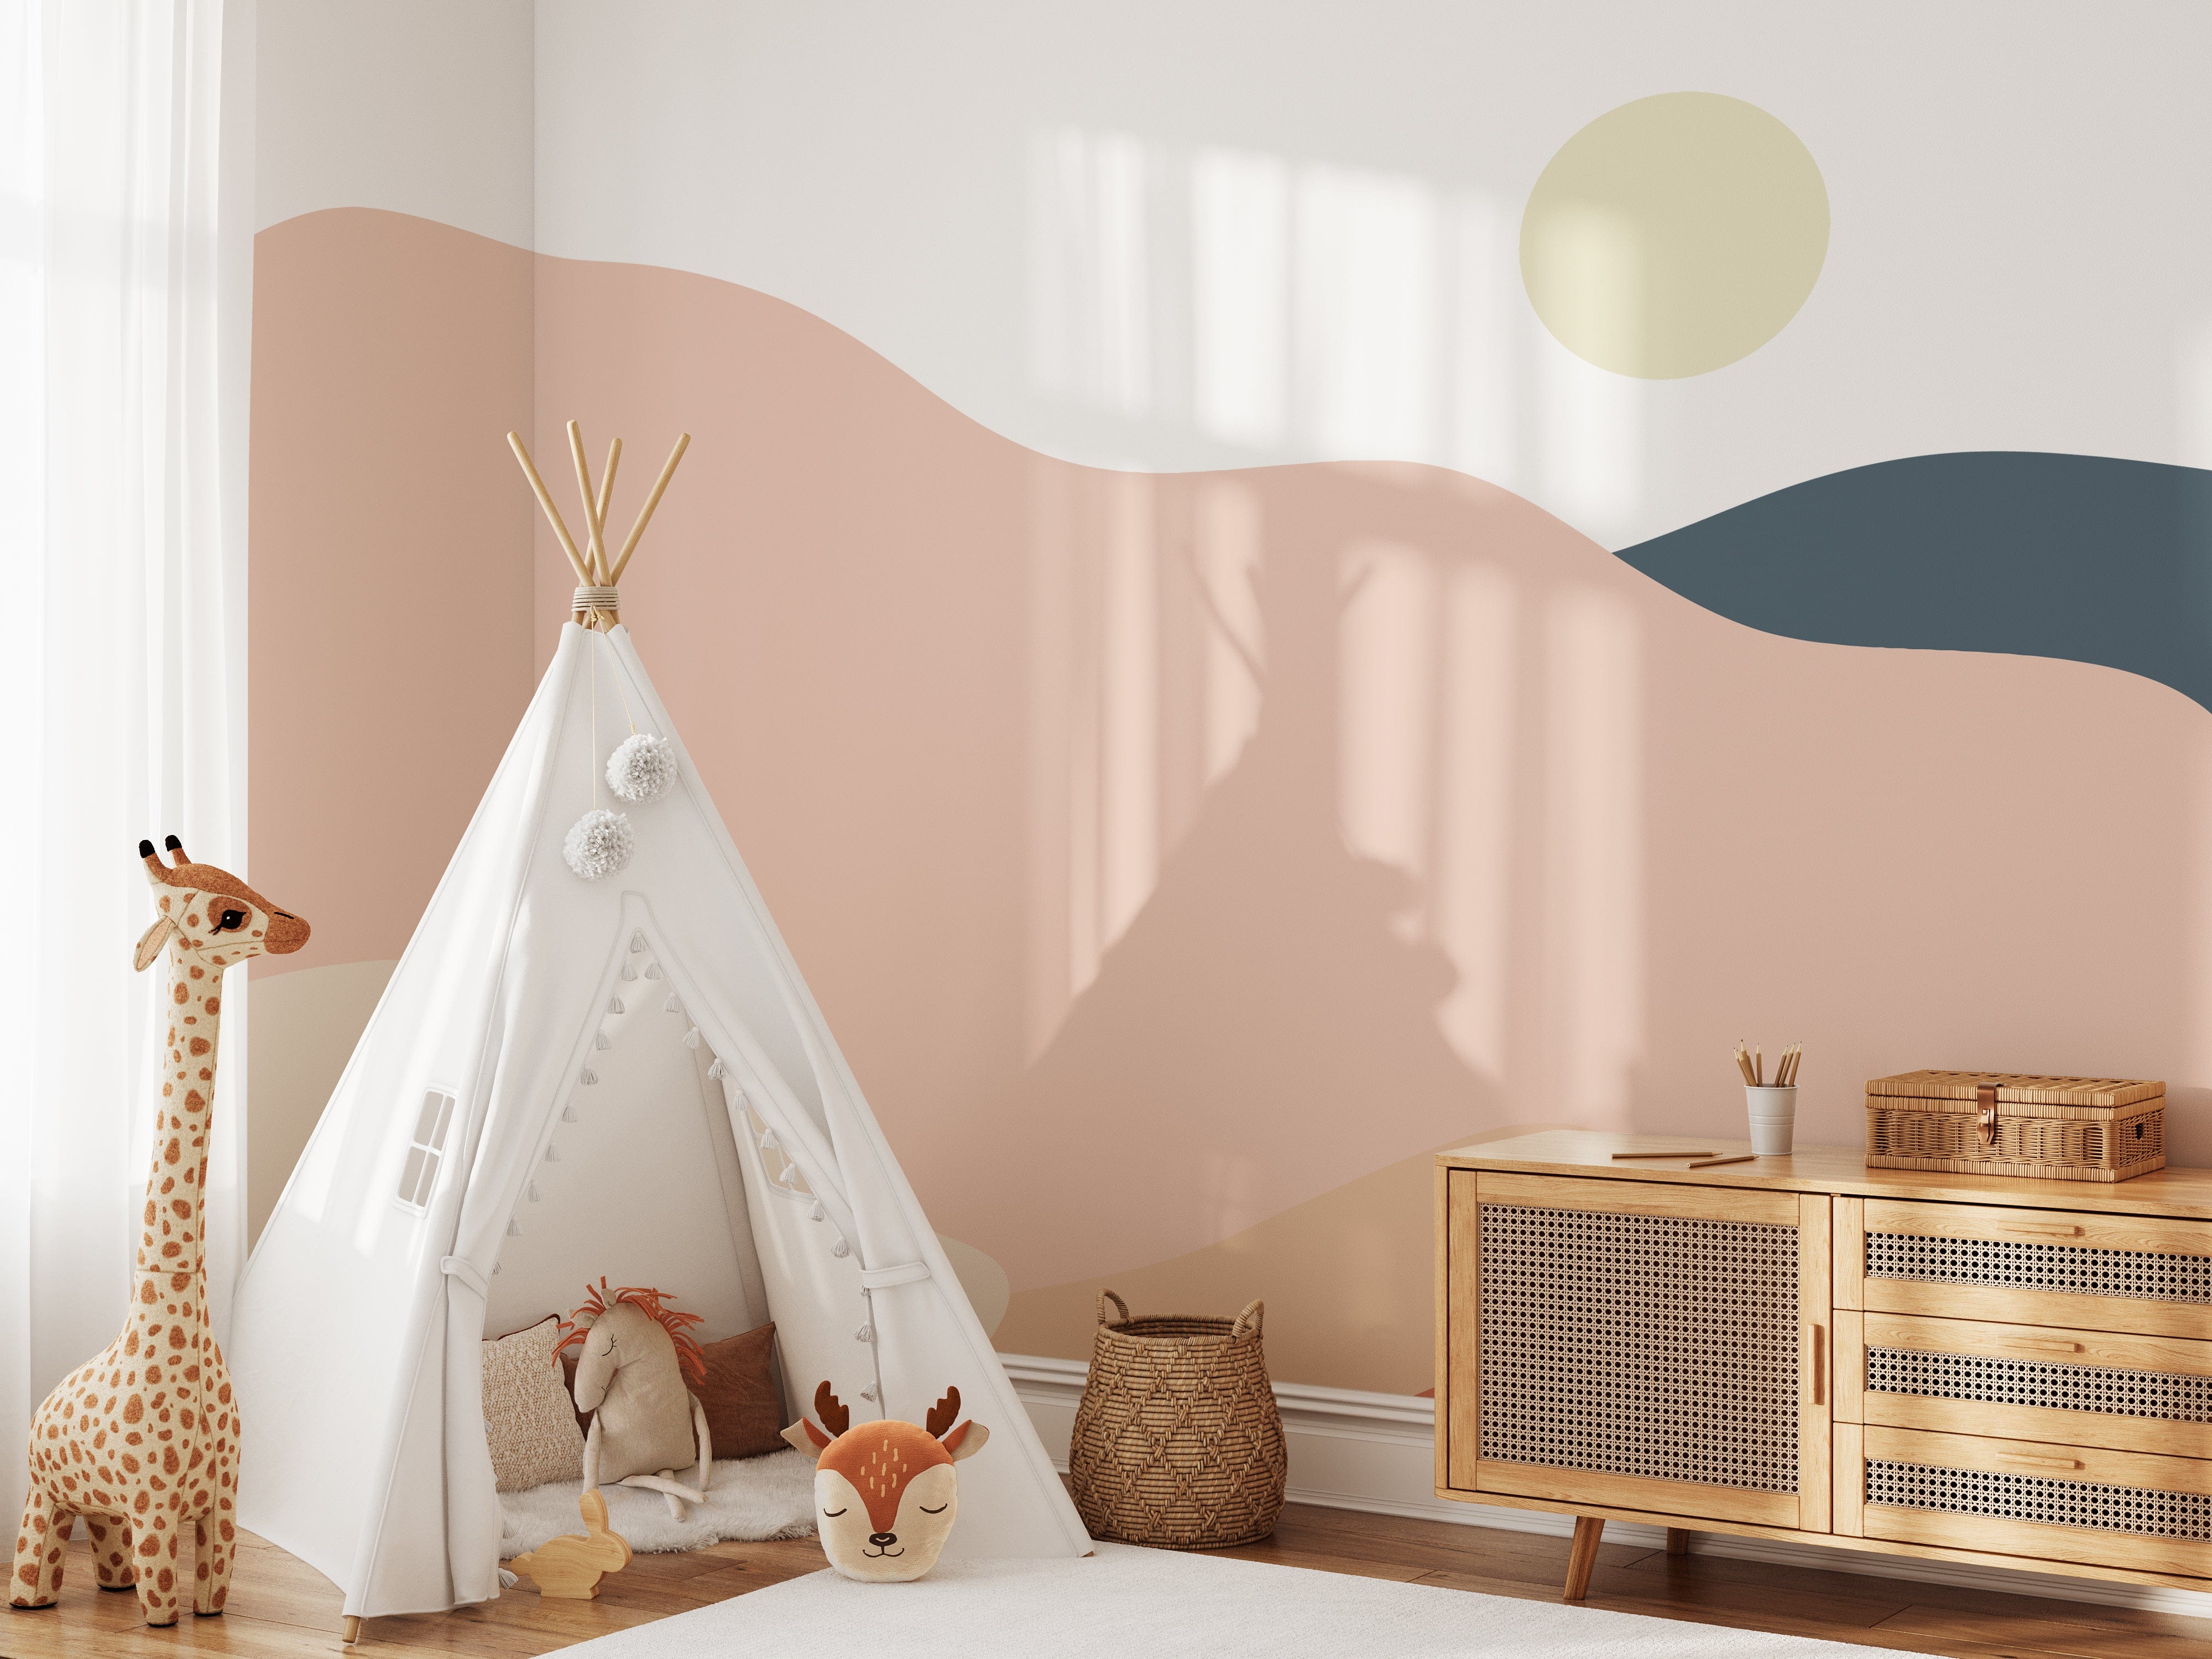 Pastel Playground Kids Mural Wallpaper in a charming children's room with a white teepee, plush giraffe toy, wicker basket, and a wooden dresser. The wallpaper features soft, wavy pastel colors with a sun motif